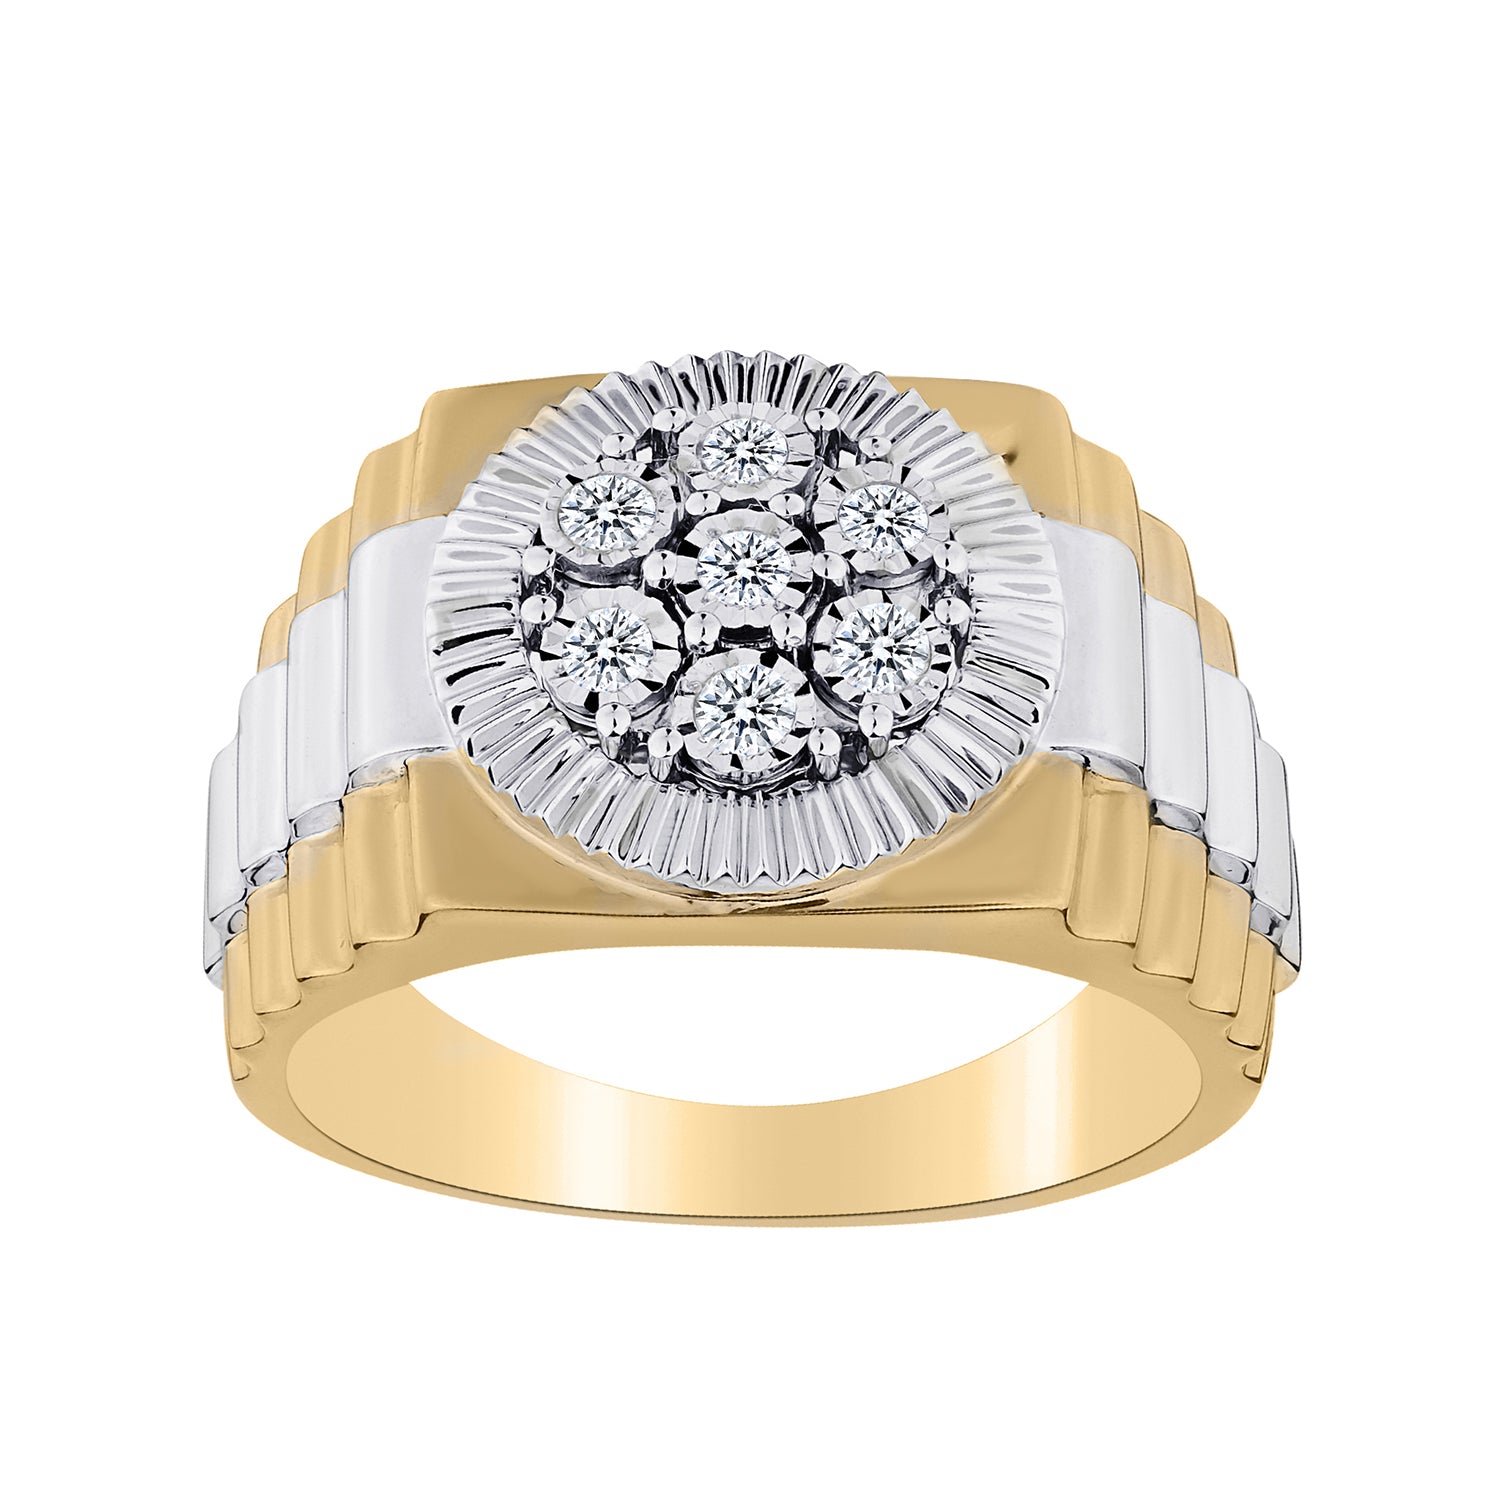 .25 CARAT DIAMOND GENTLEMAN'S RING, 10kt WHITE AND YELLOW GOLD (TWO TONE)…...................NOW - Griffin Jewellery Designs